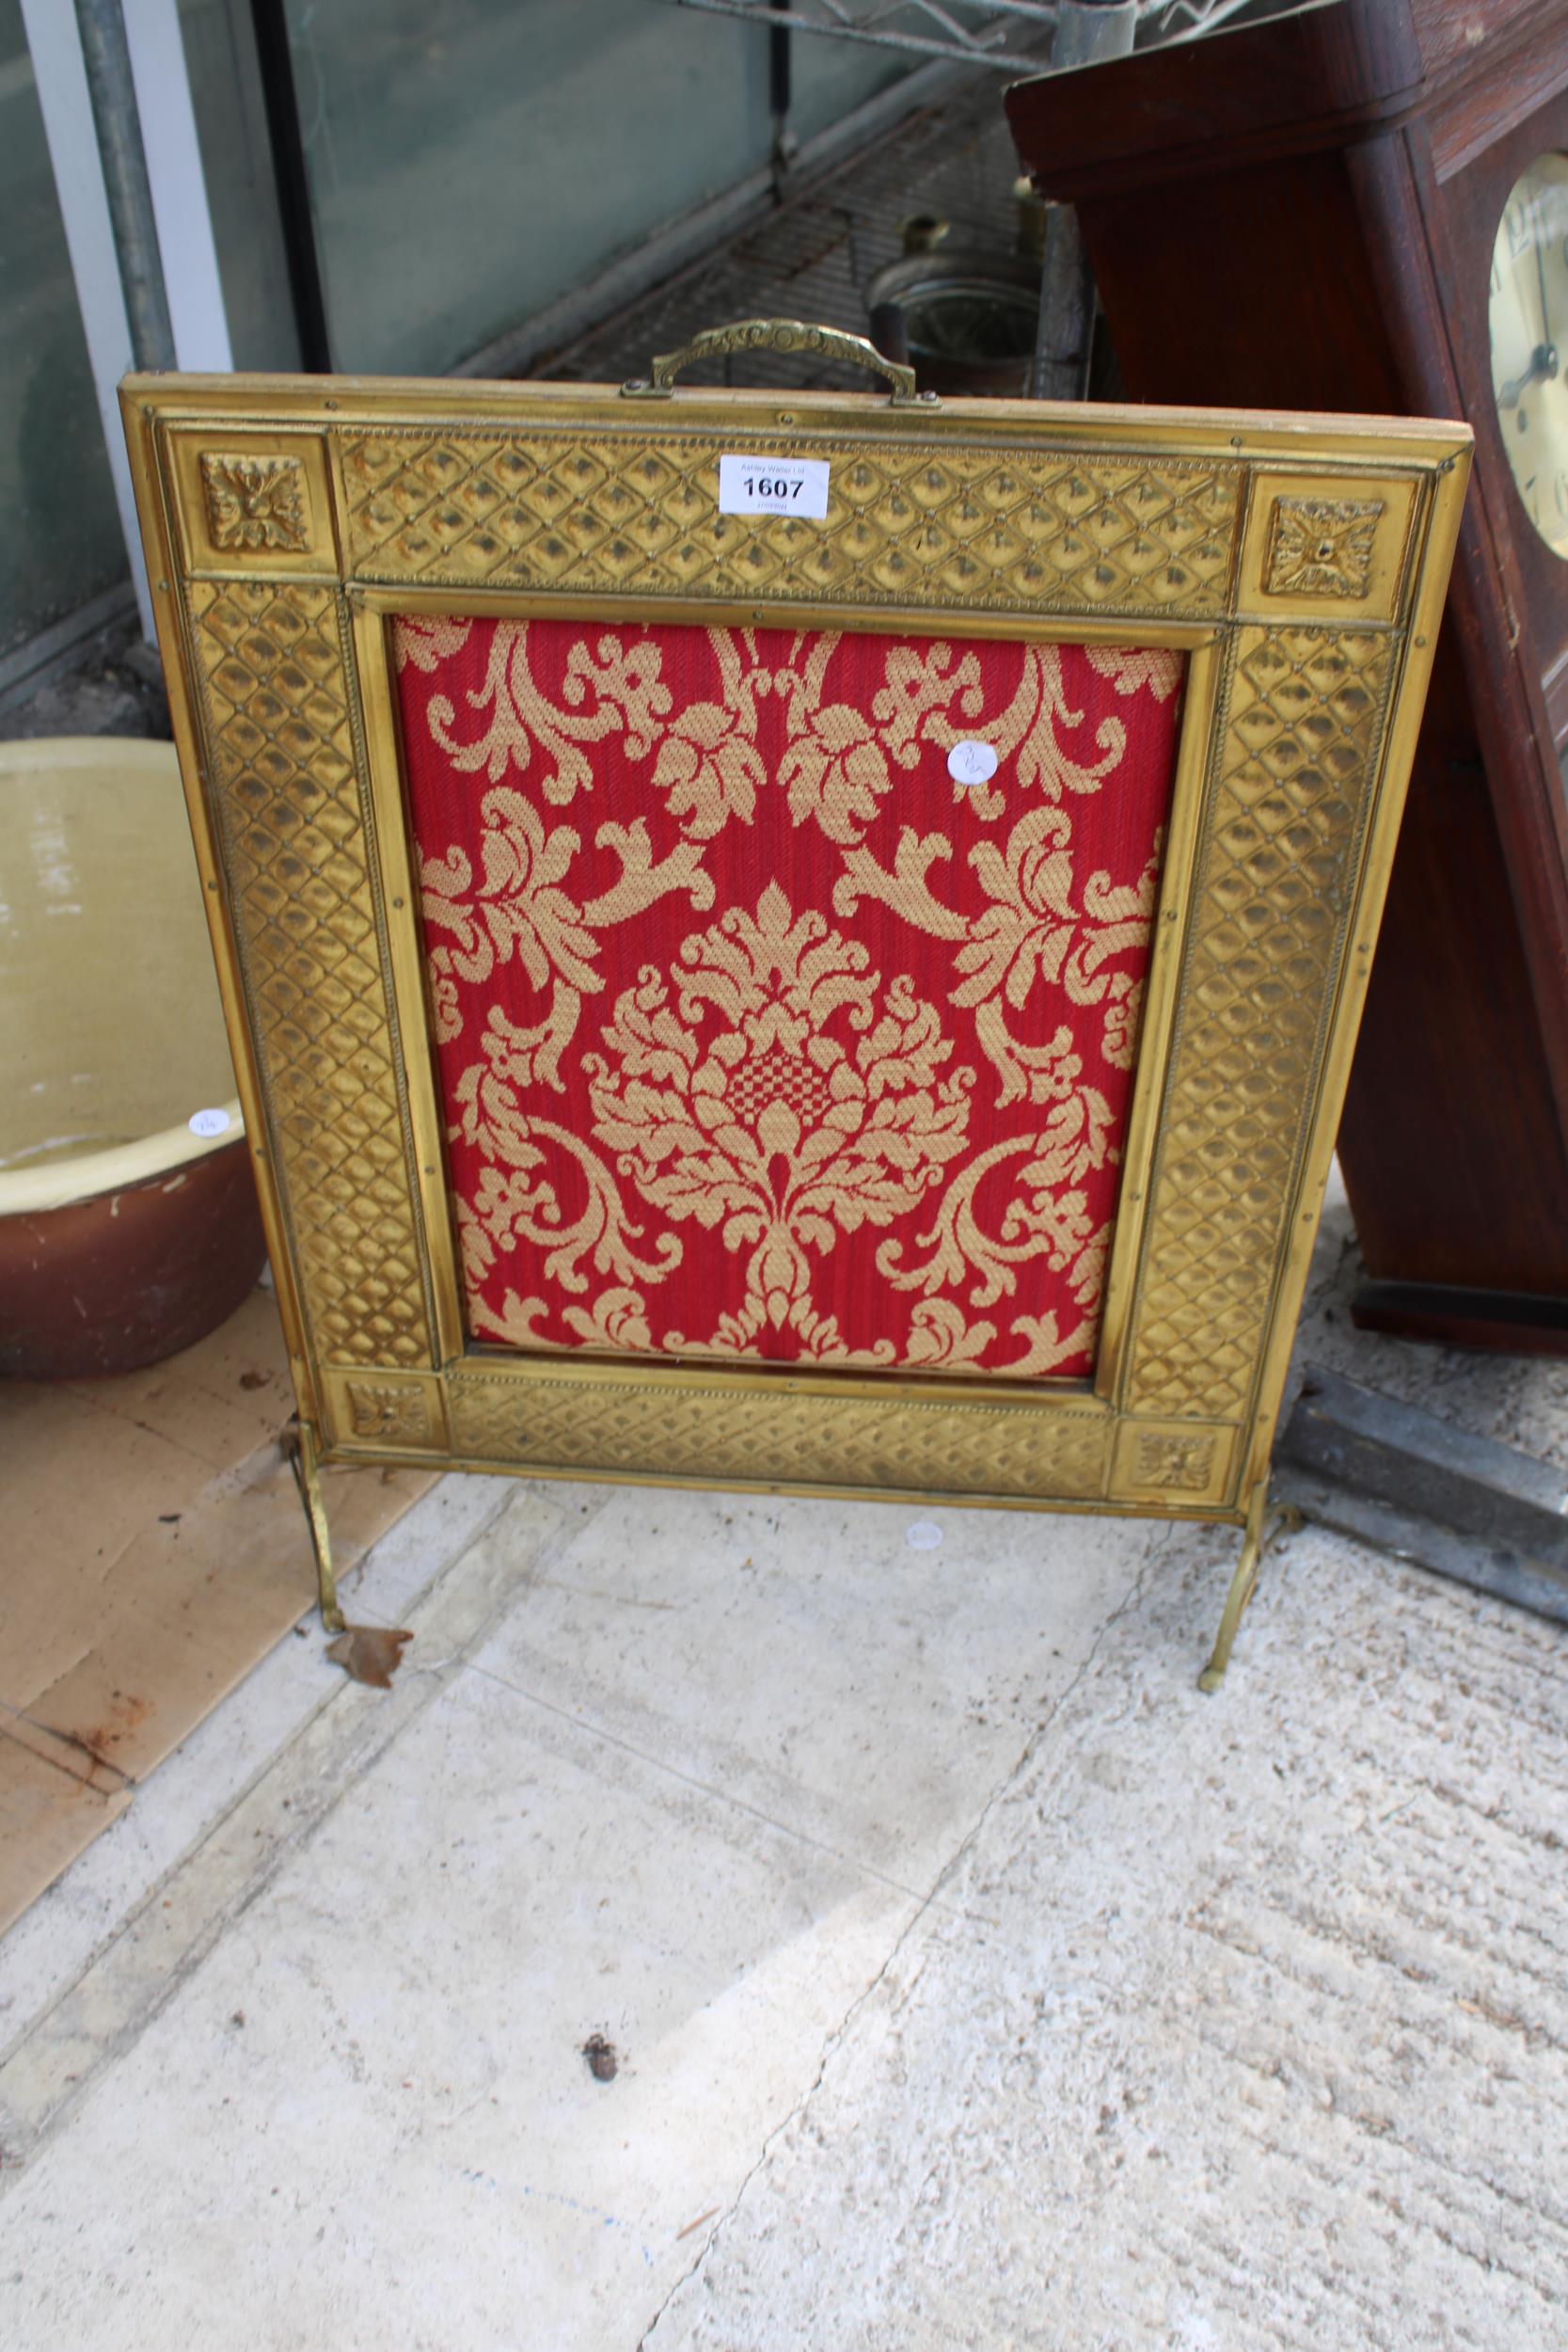 A DECORATIVE BRASS FIRE SCREEN WITH A TAPESTRY CENTRE